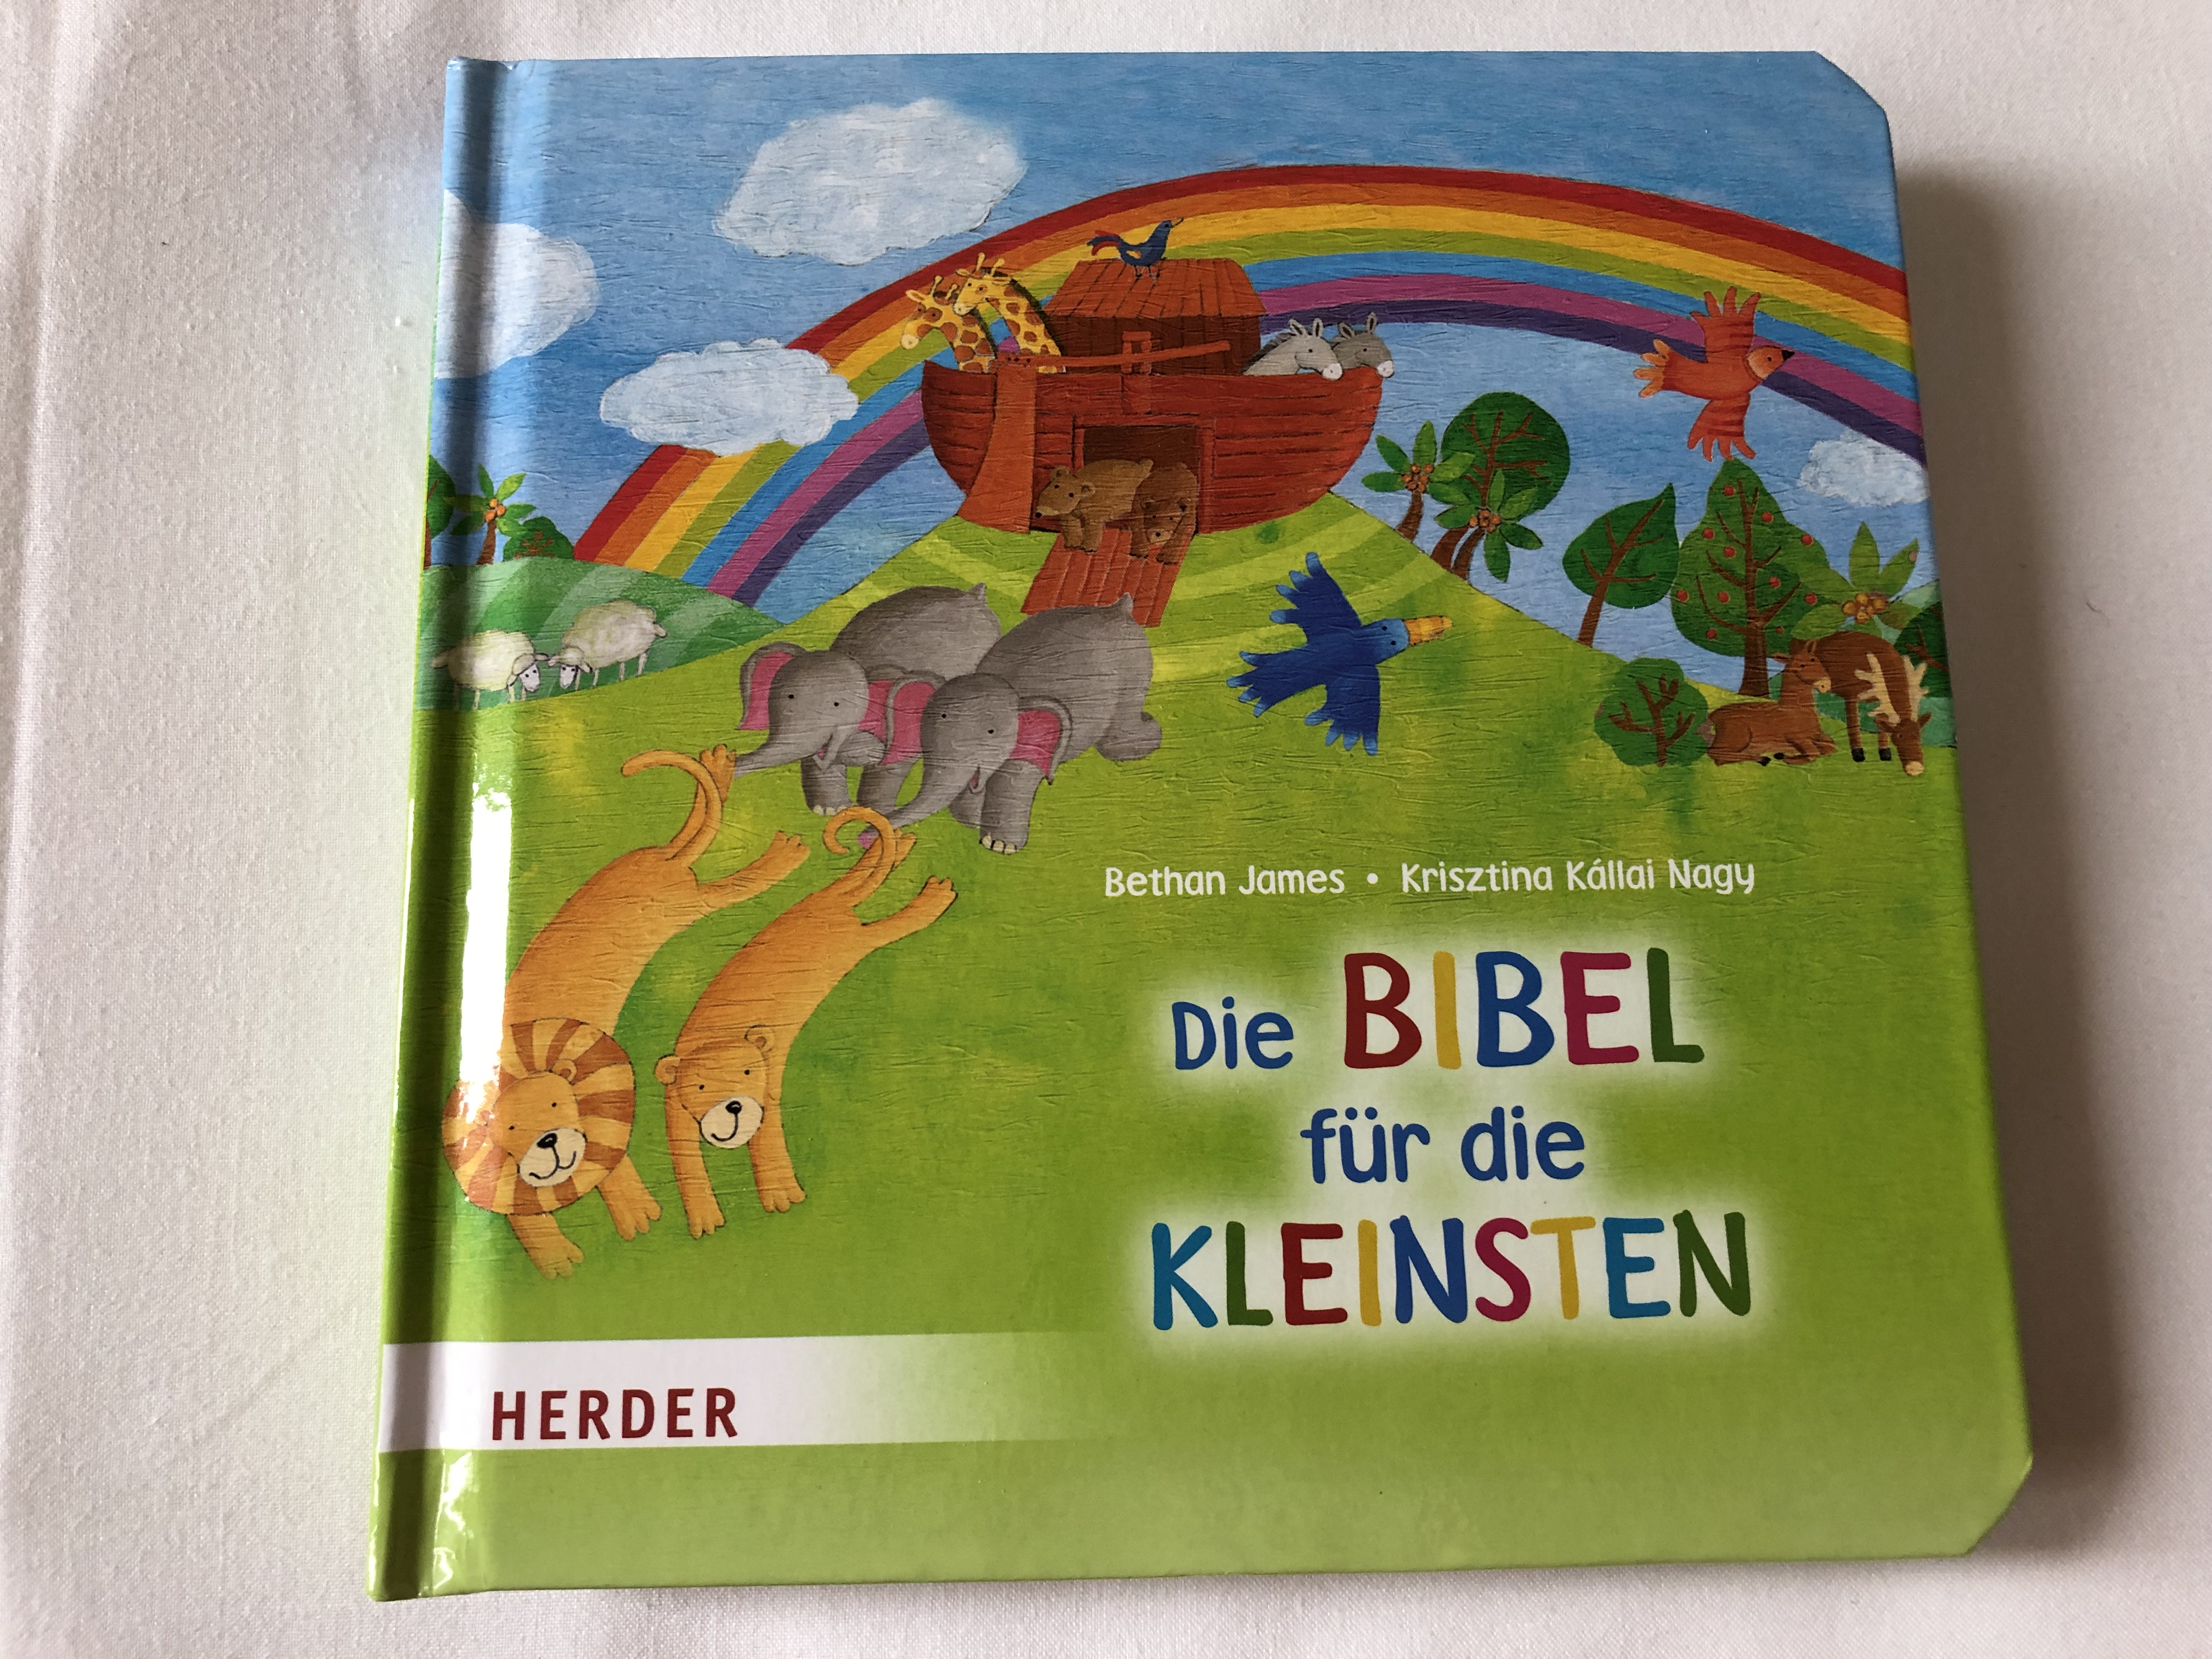 die-bibel-f-r-die-kleinsten-by-bethan-james-german-translation-of-my-picture-bible-boardbook-illustrations-krisztina-k-llai-nagy-beautiful-and-well-known-stories-of-the-bible-in-simple-language-and-color-illustrations-201-1-.jpg